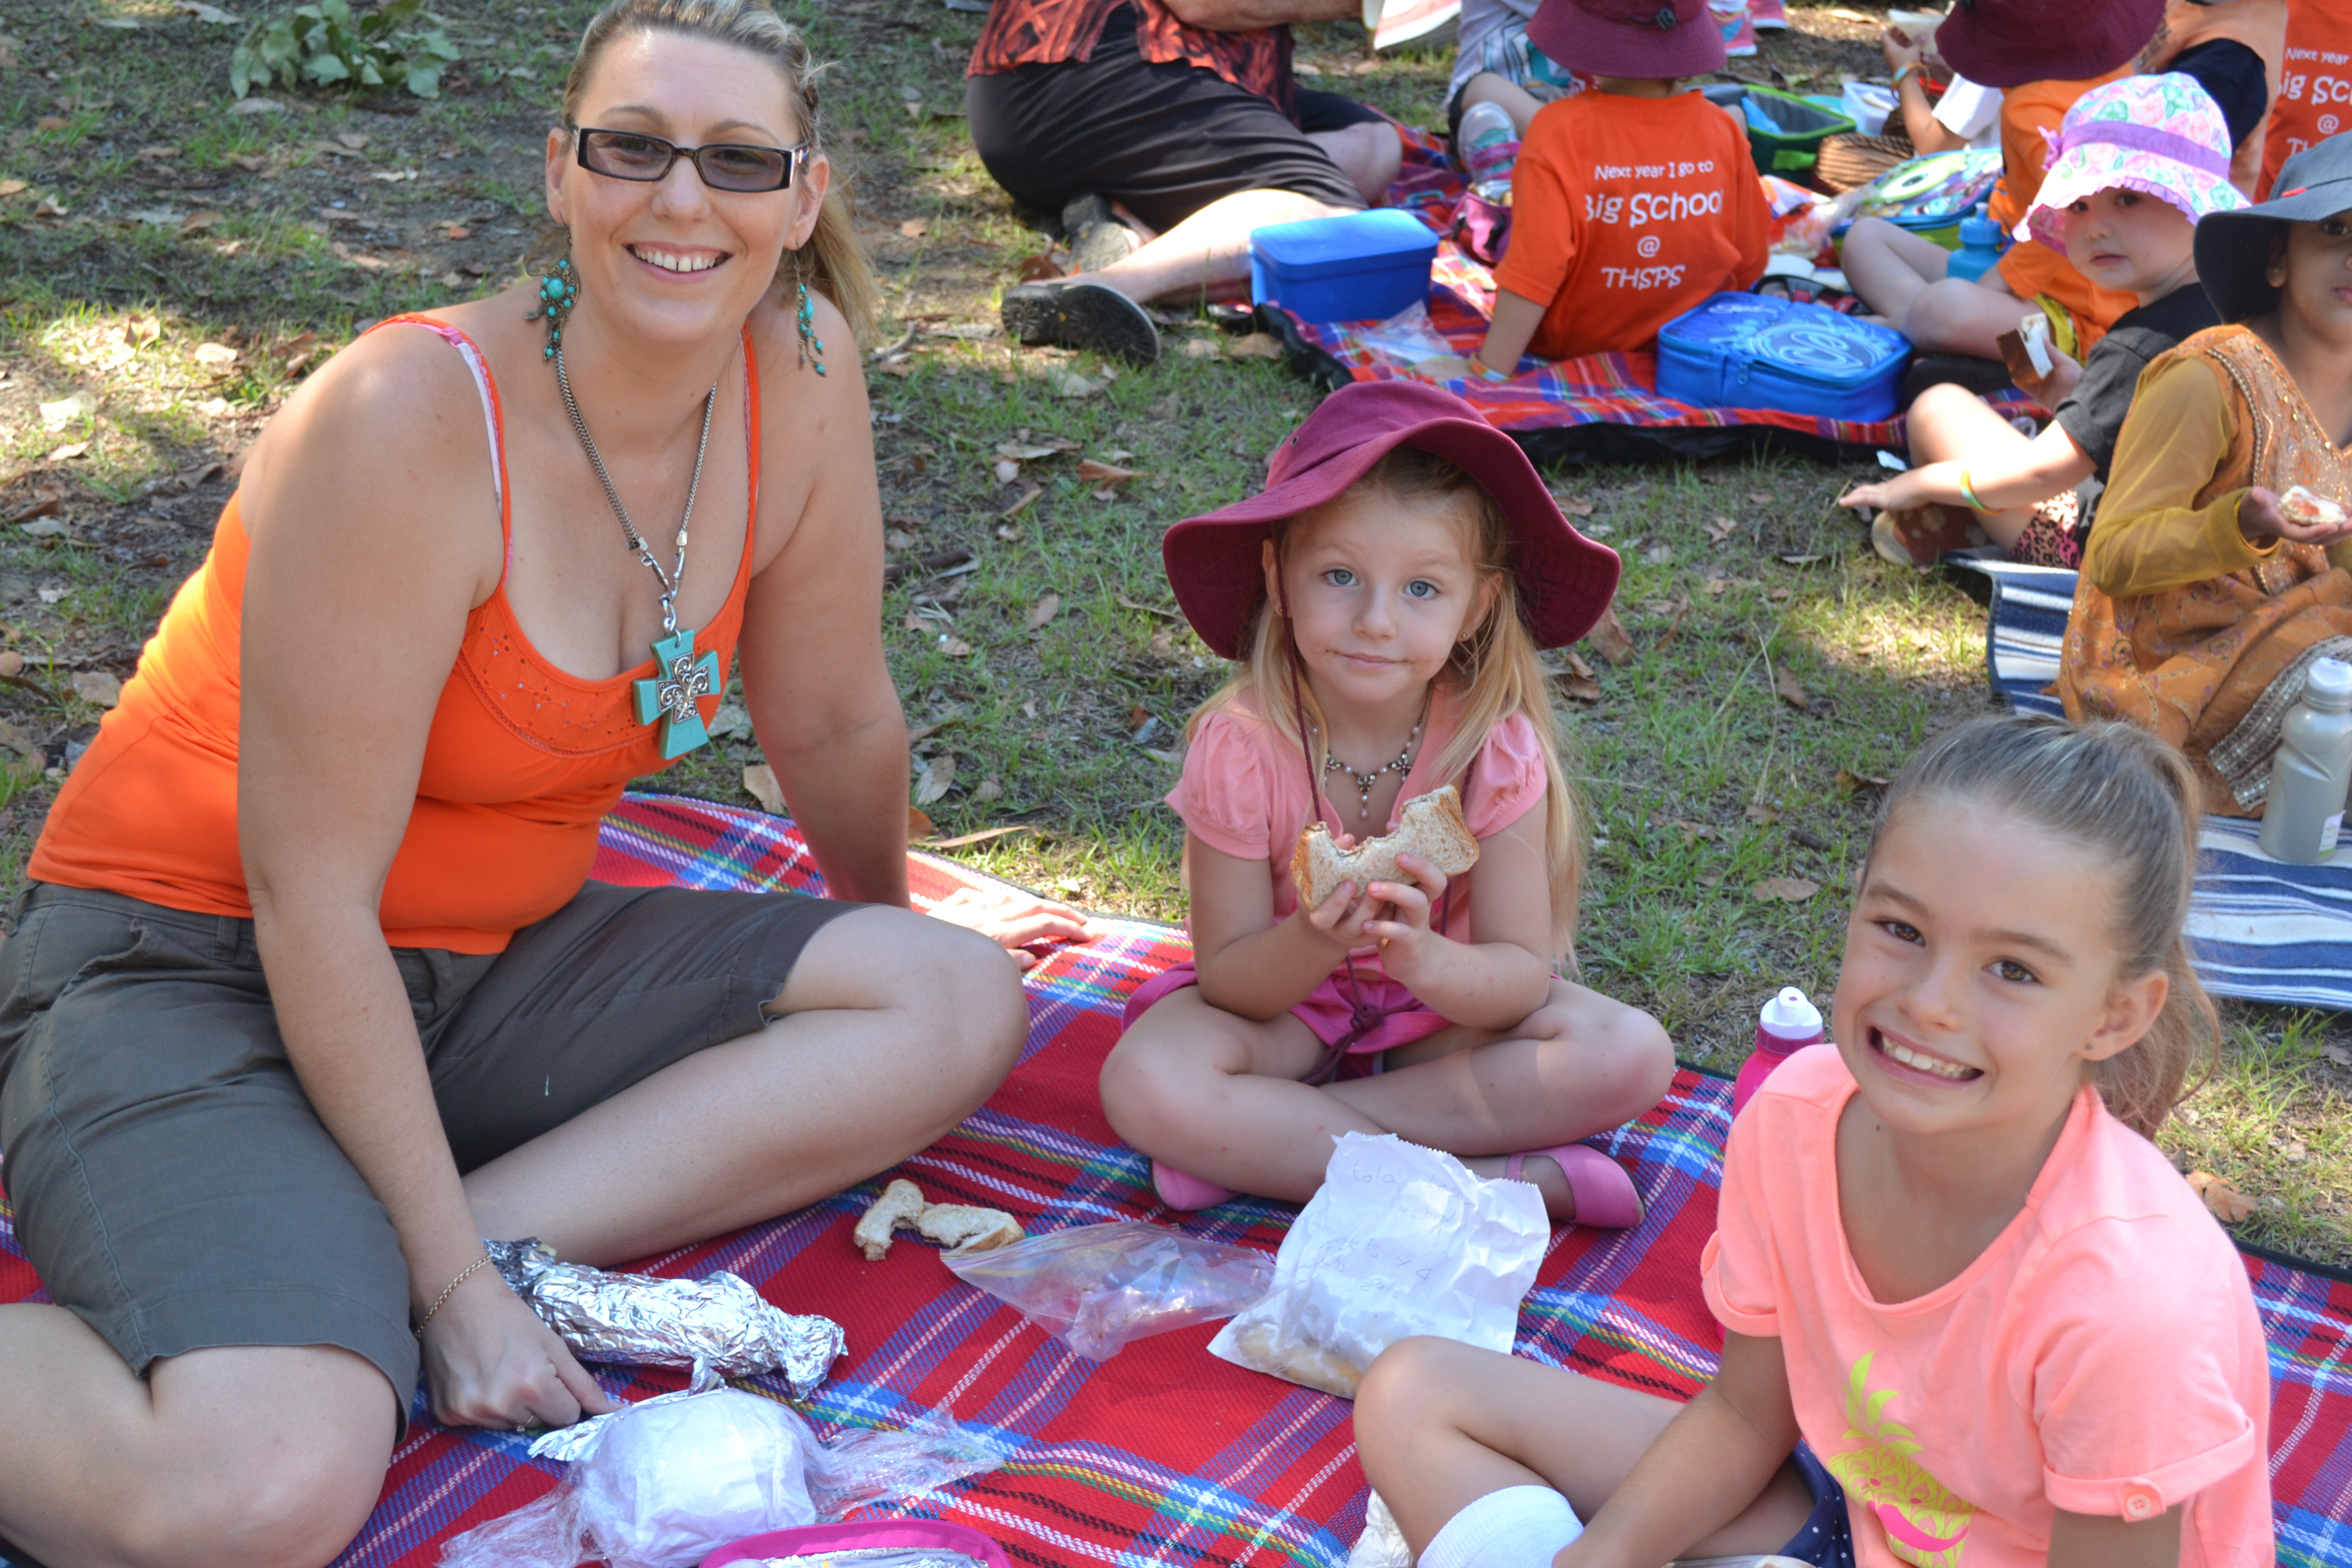 Aurelie with her mum and sister enjoying a picnic lunch together